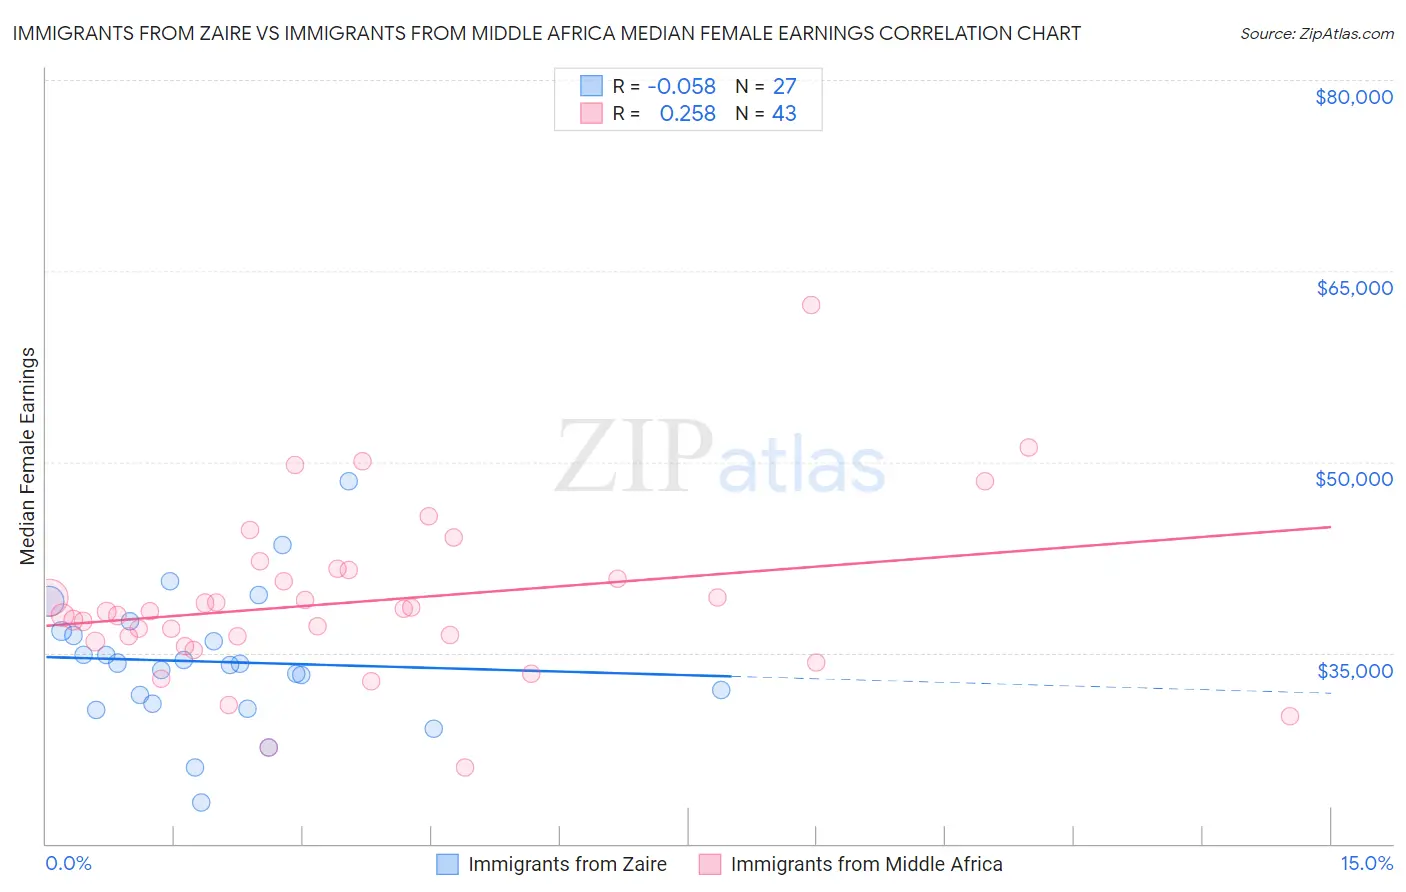 Immigrants from Zaire vs Immigrants from Middle Africa Median Female Earnings